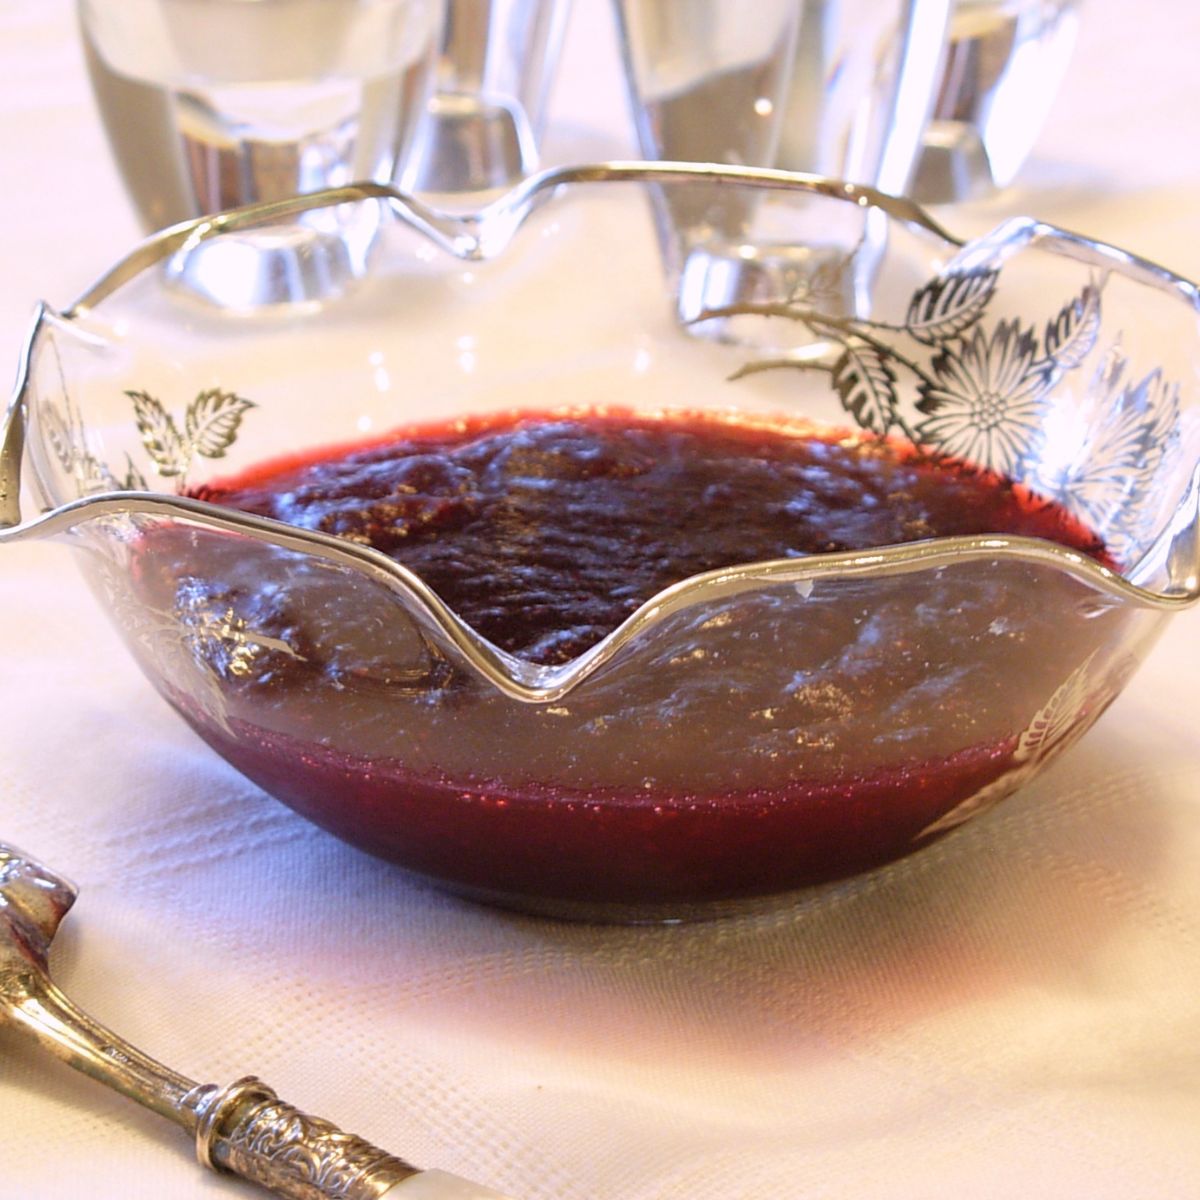 Homemade Jellied Cranberry Sauce made from whole, fresh cranberries, and displayed in a beautiful crystal bowl.